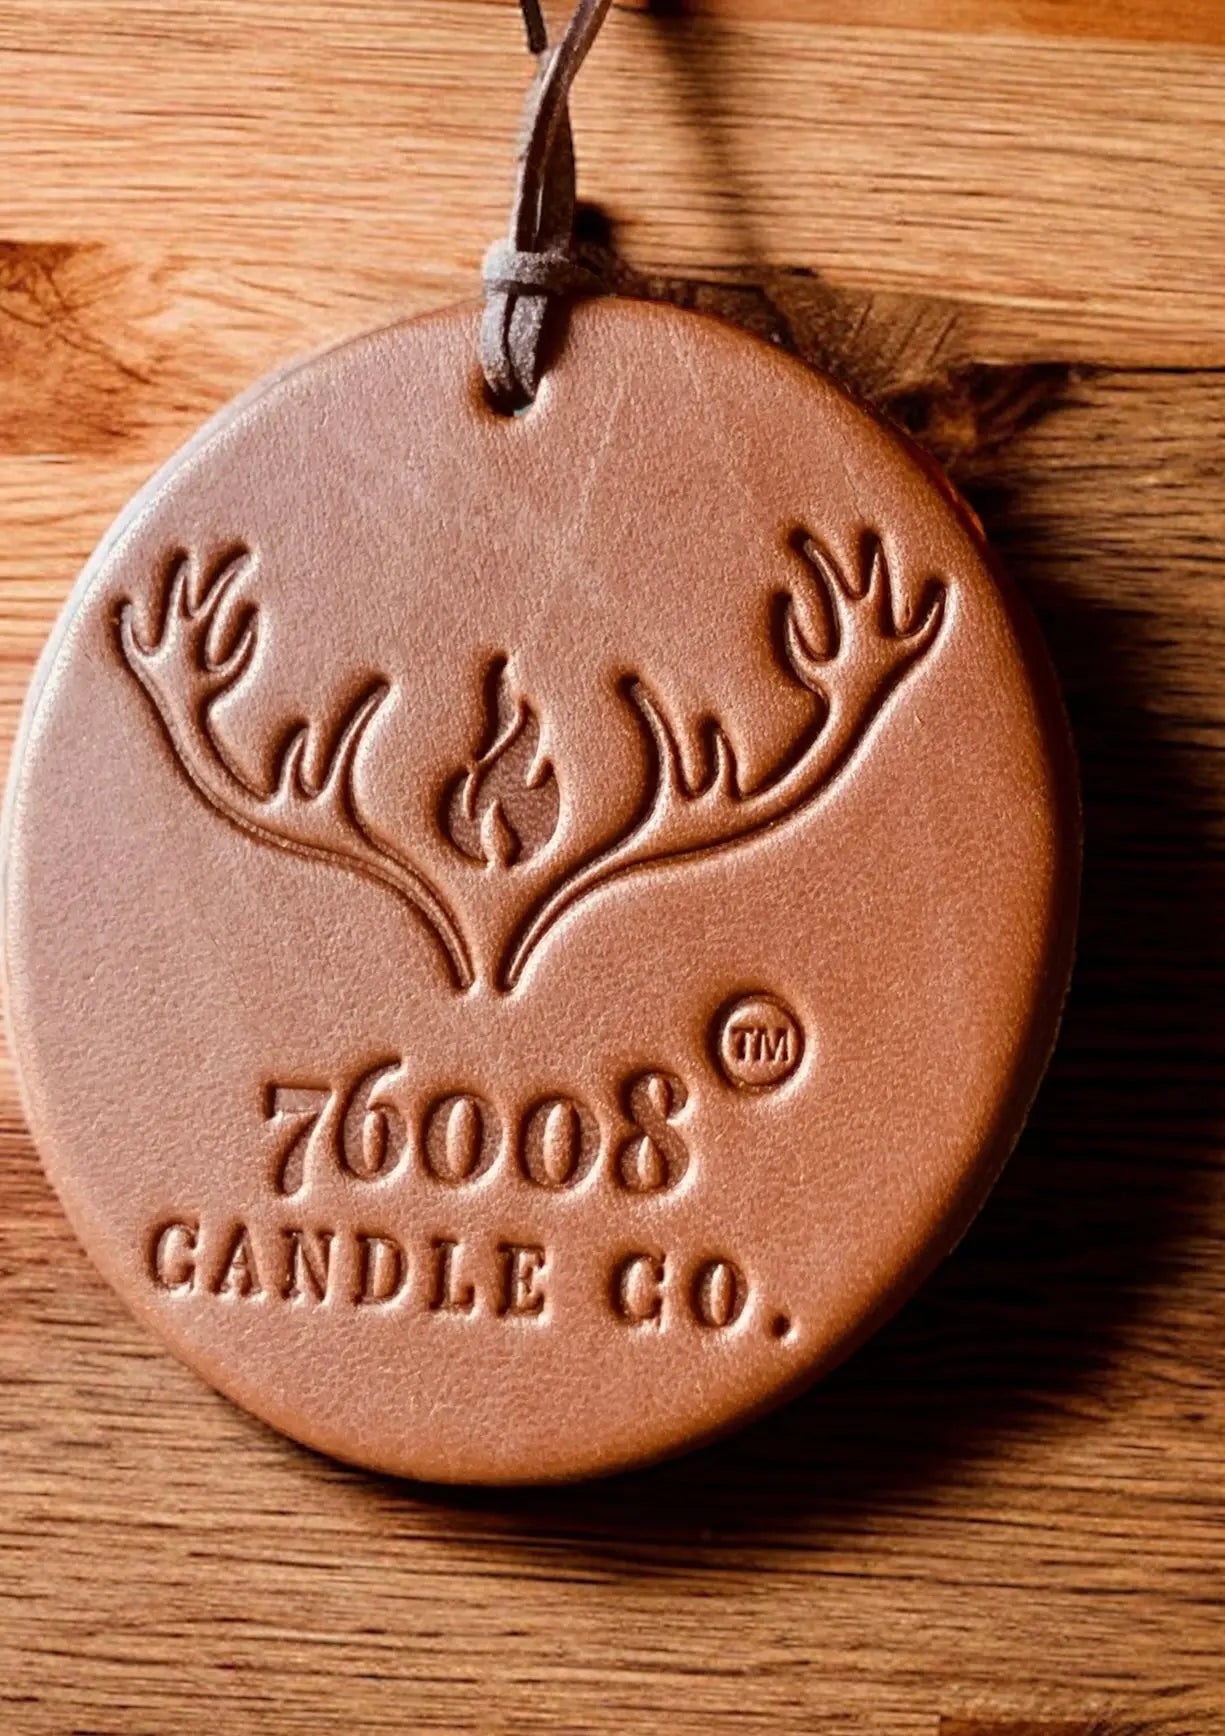 Leather Scented Car Freshener | Car Air Freshener | Gifts for Him | Fathers Day Gifts 76008 Candle Co.